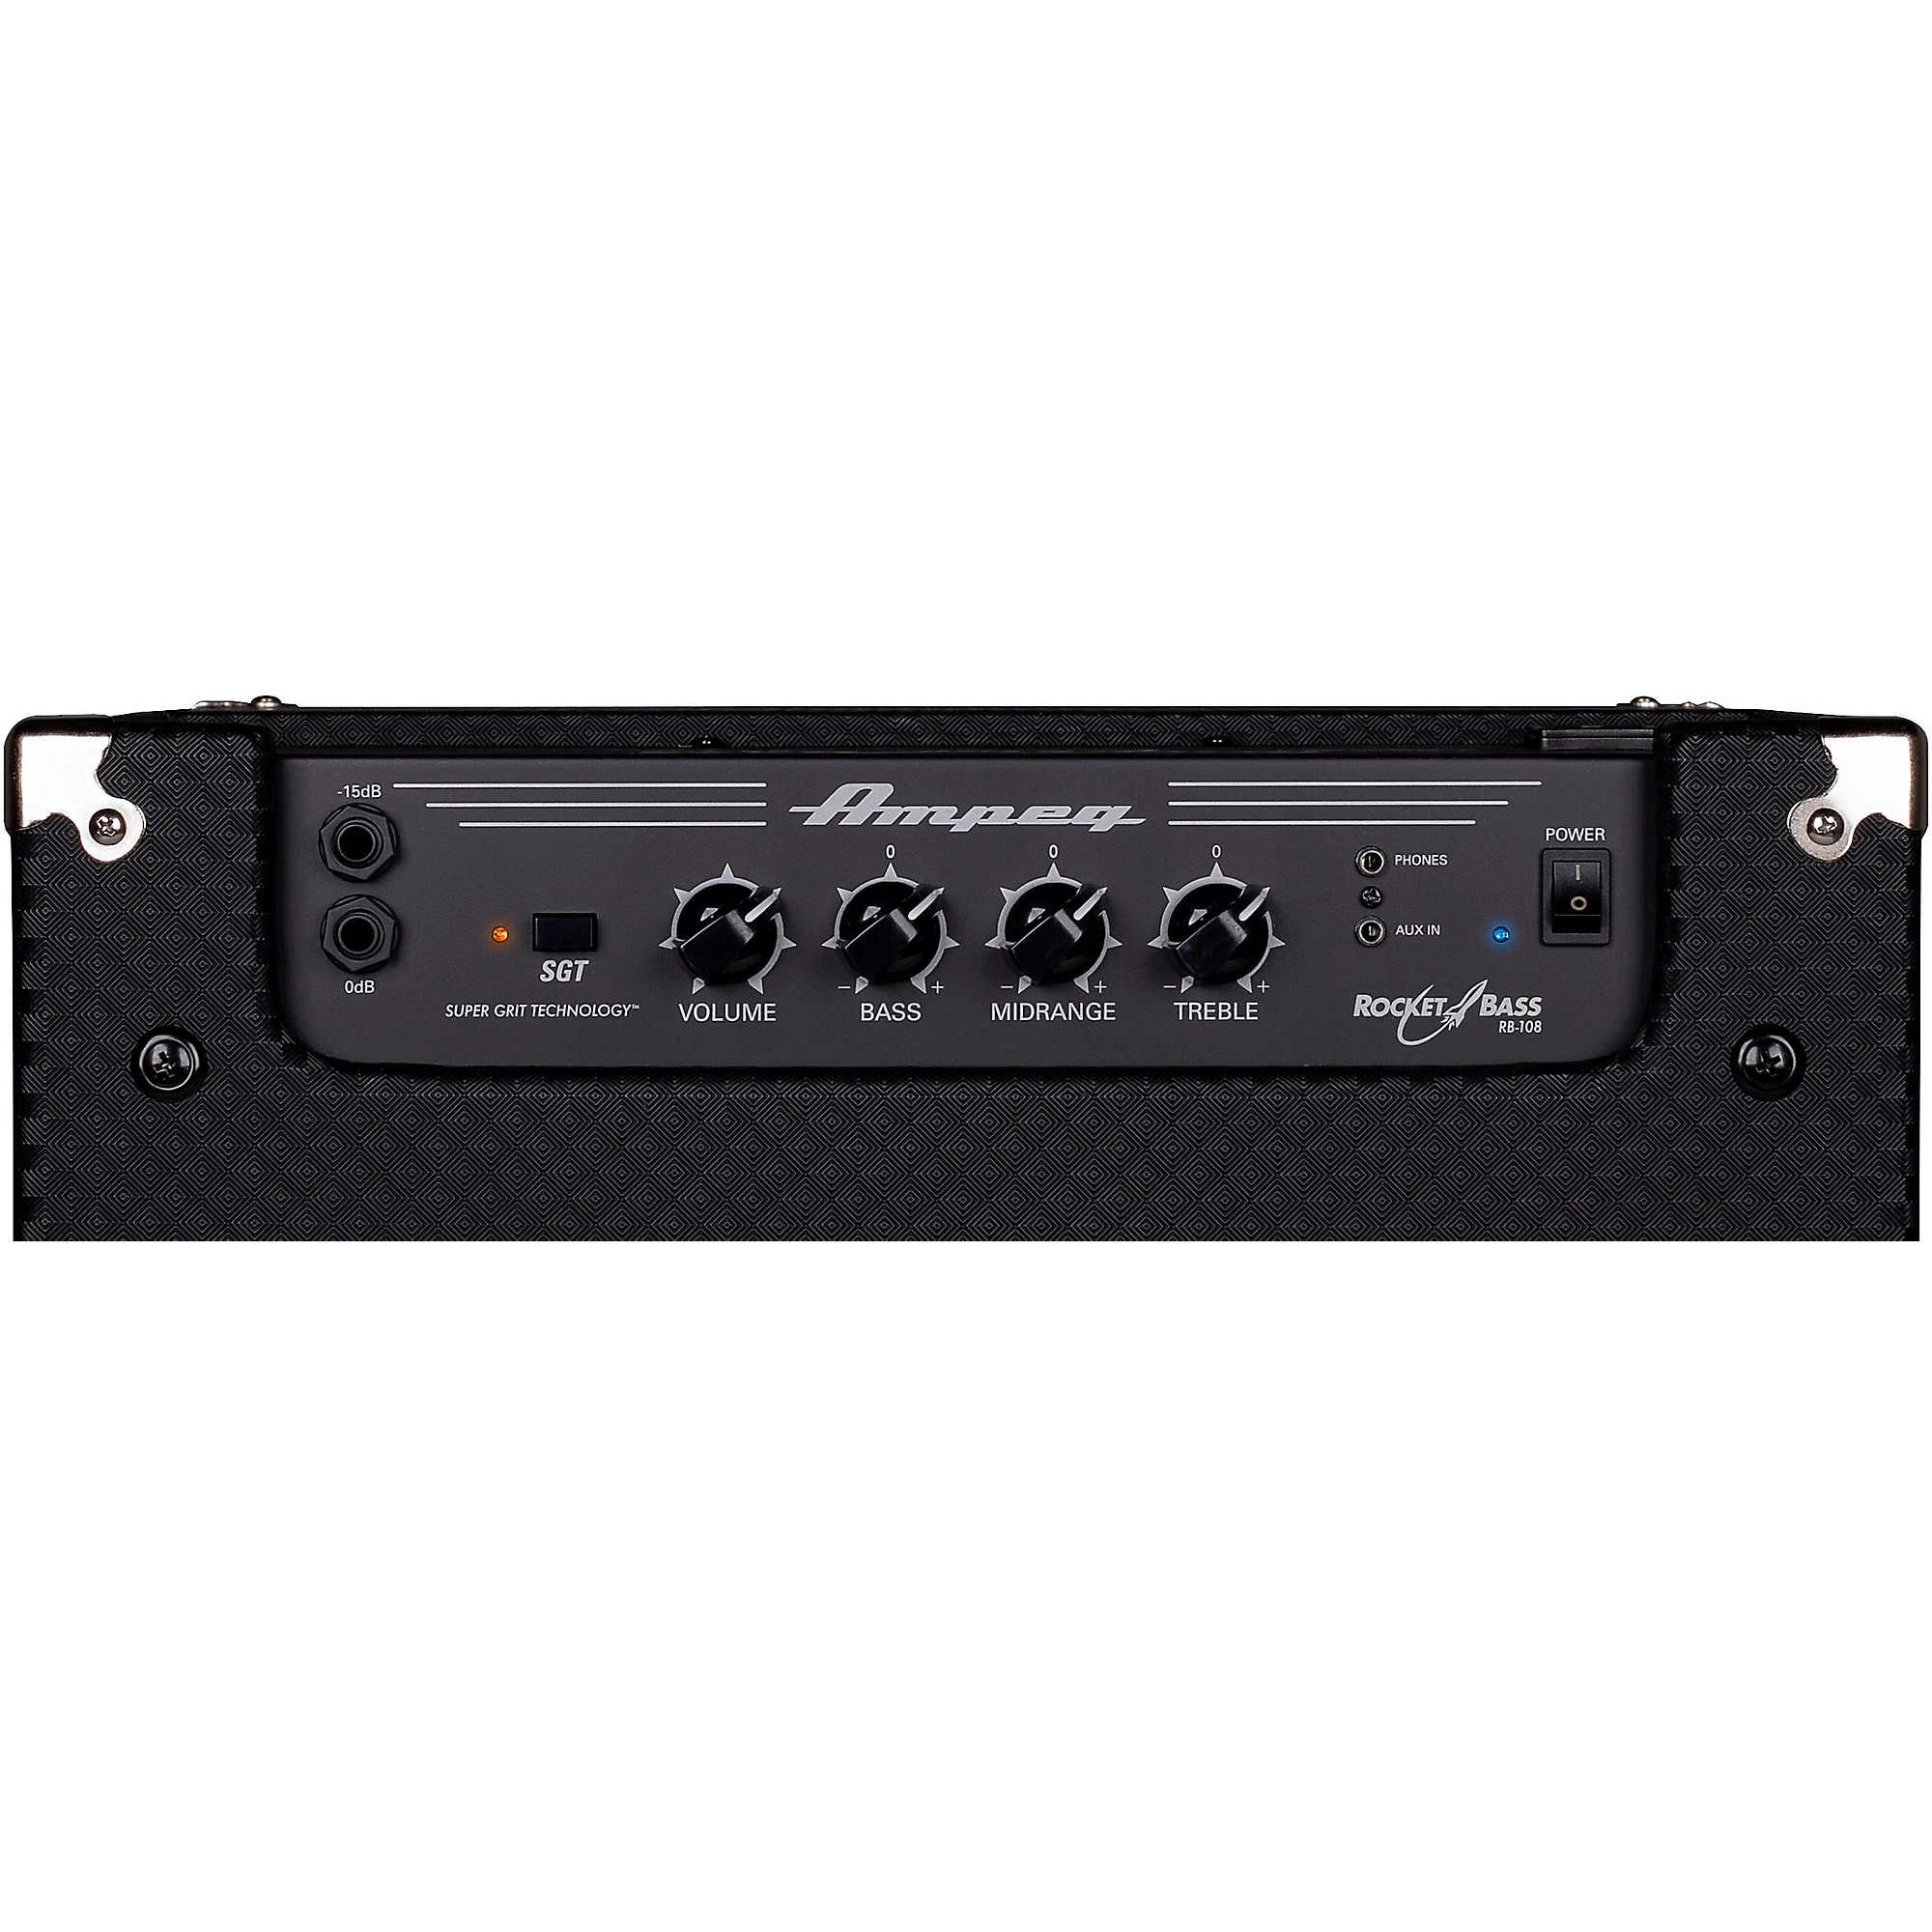 Ampeg Rocket Bass RB-108 1x8 30W Bass Combo Amp Black and 